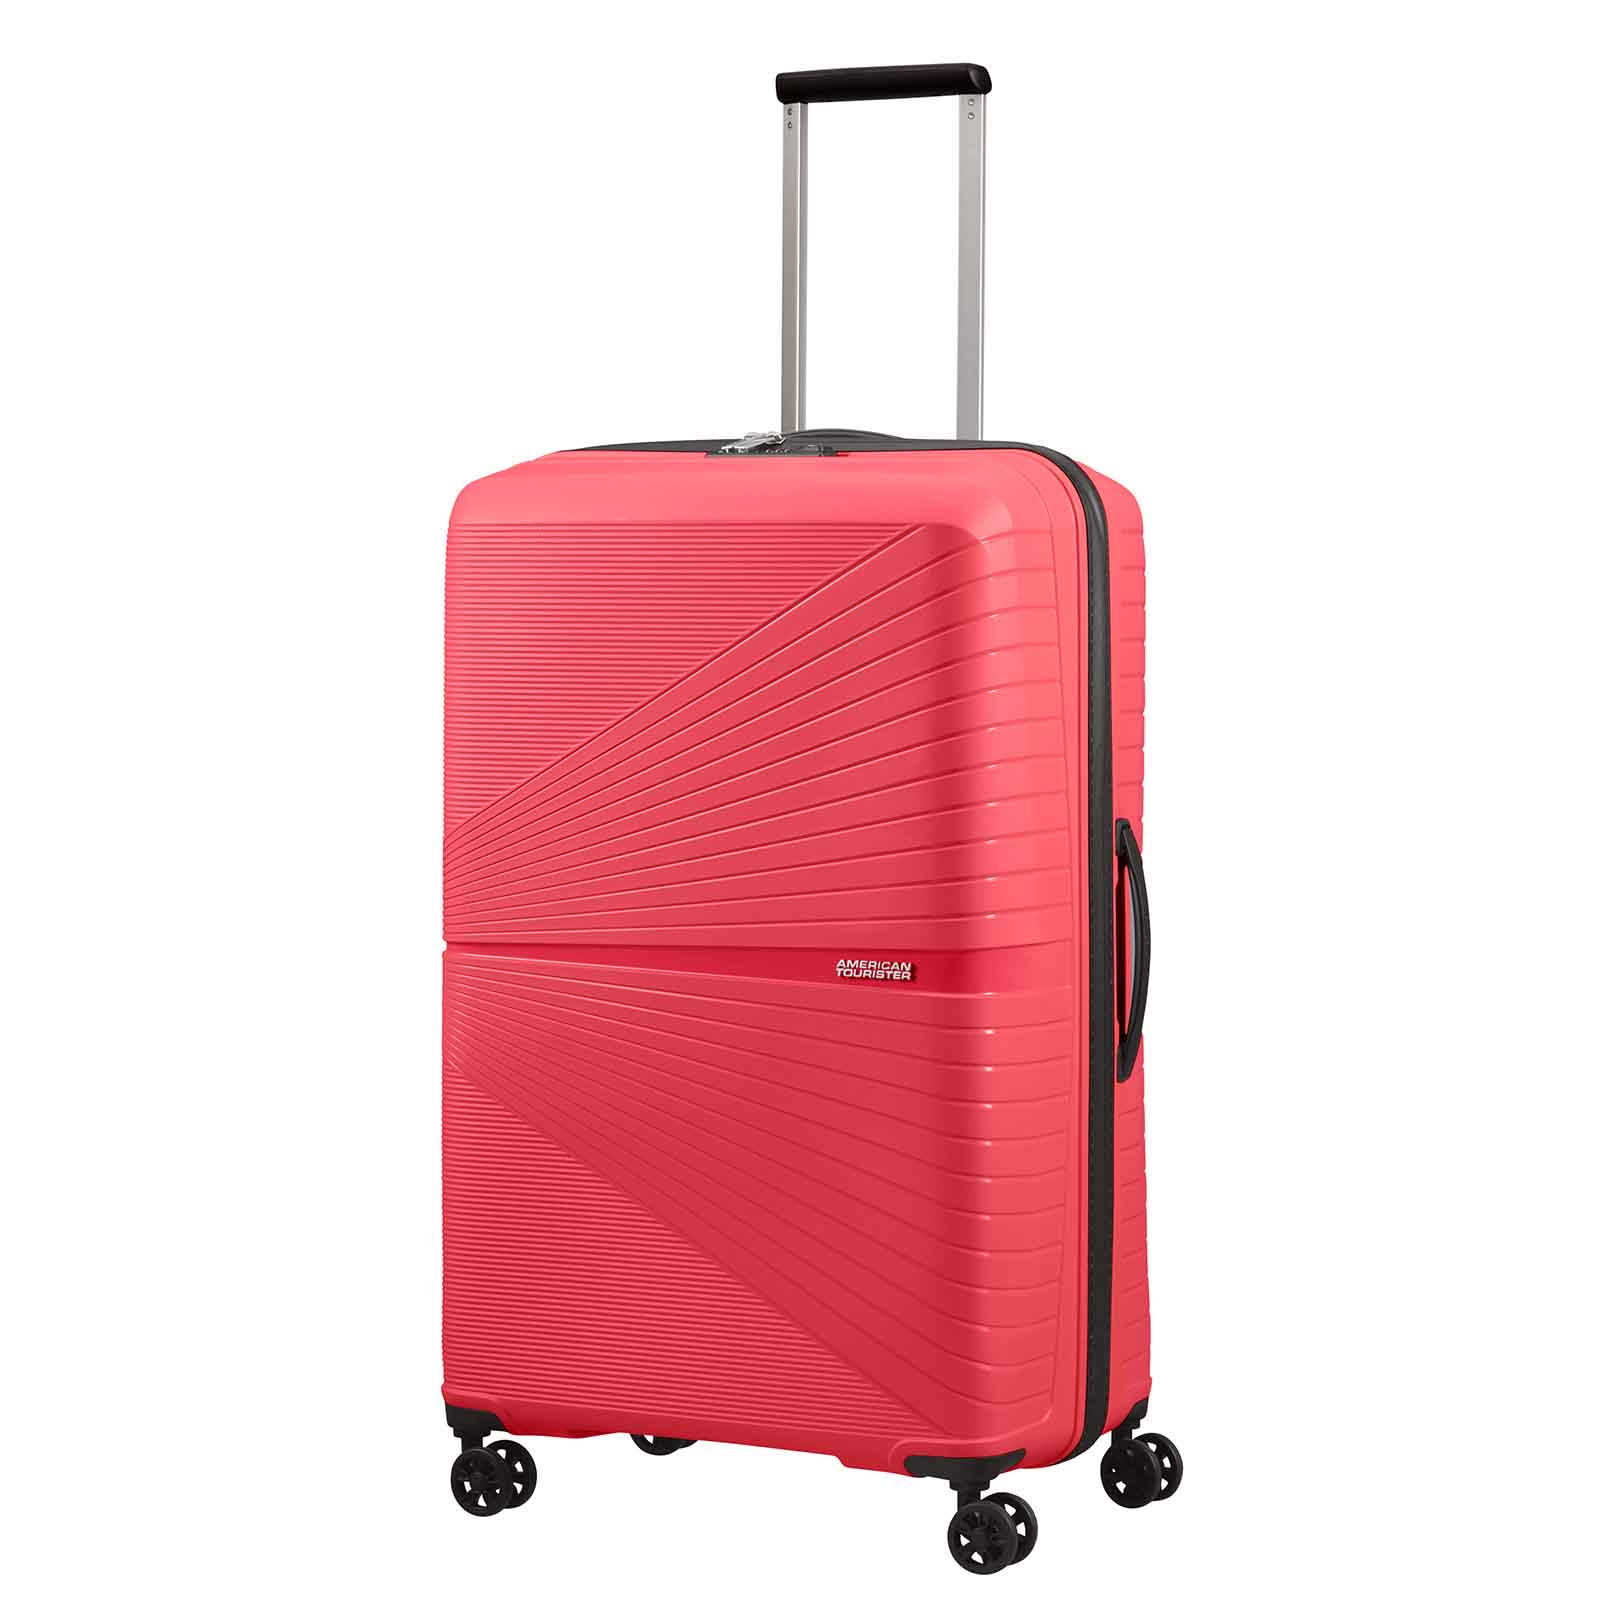 American-Tourister-Airconic-77cm-Suitcase-Paradise-Pink-Trolley